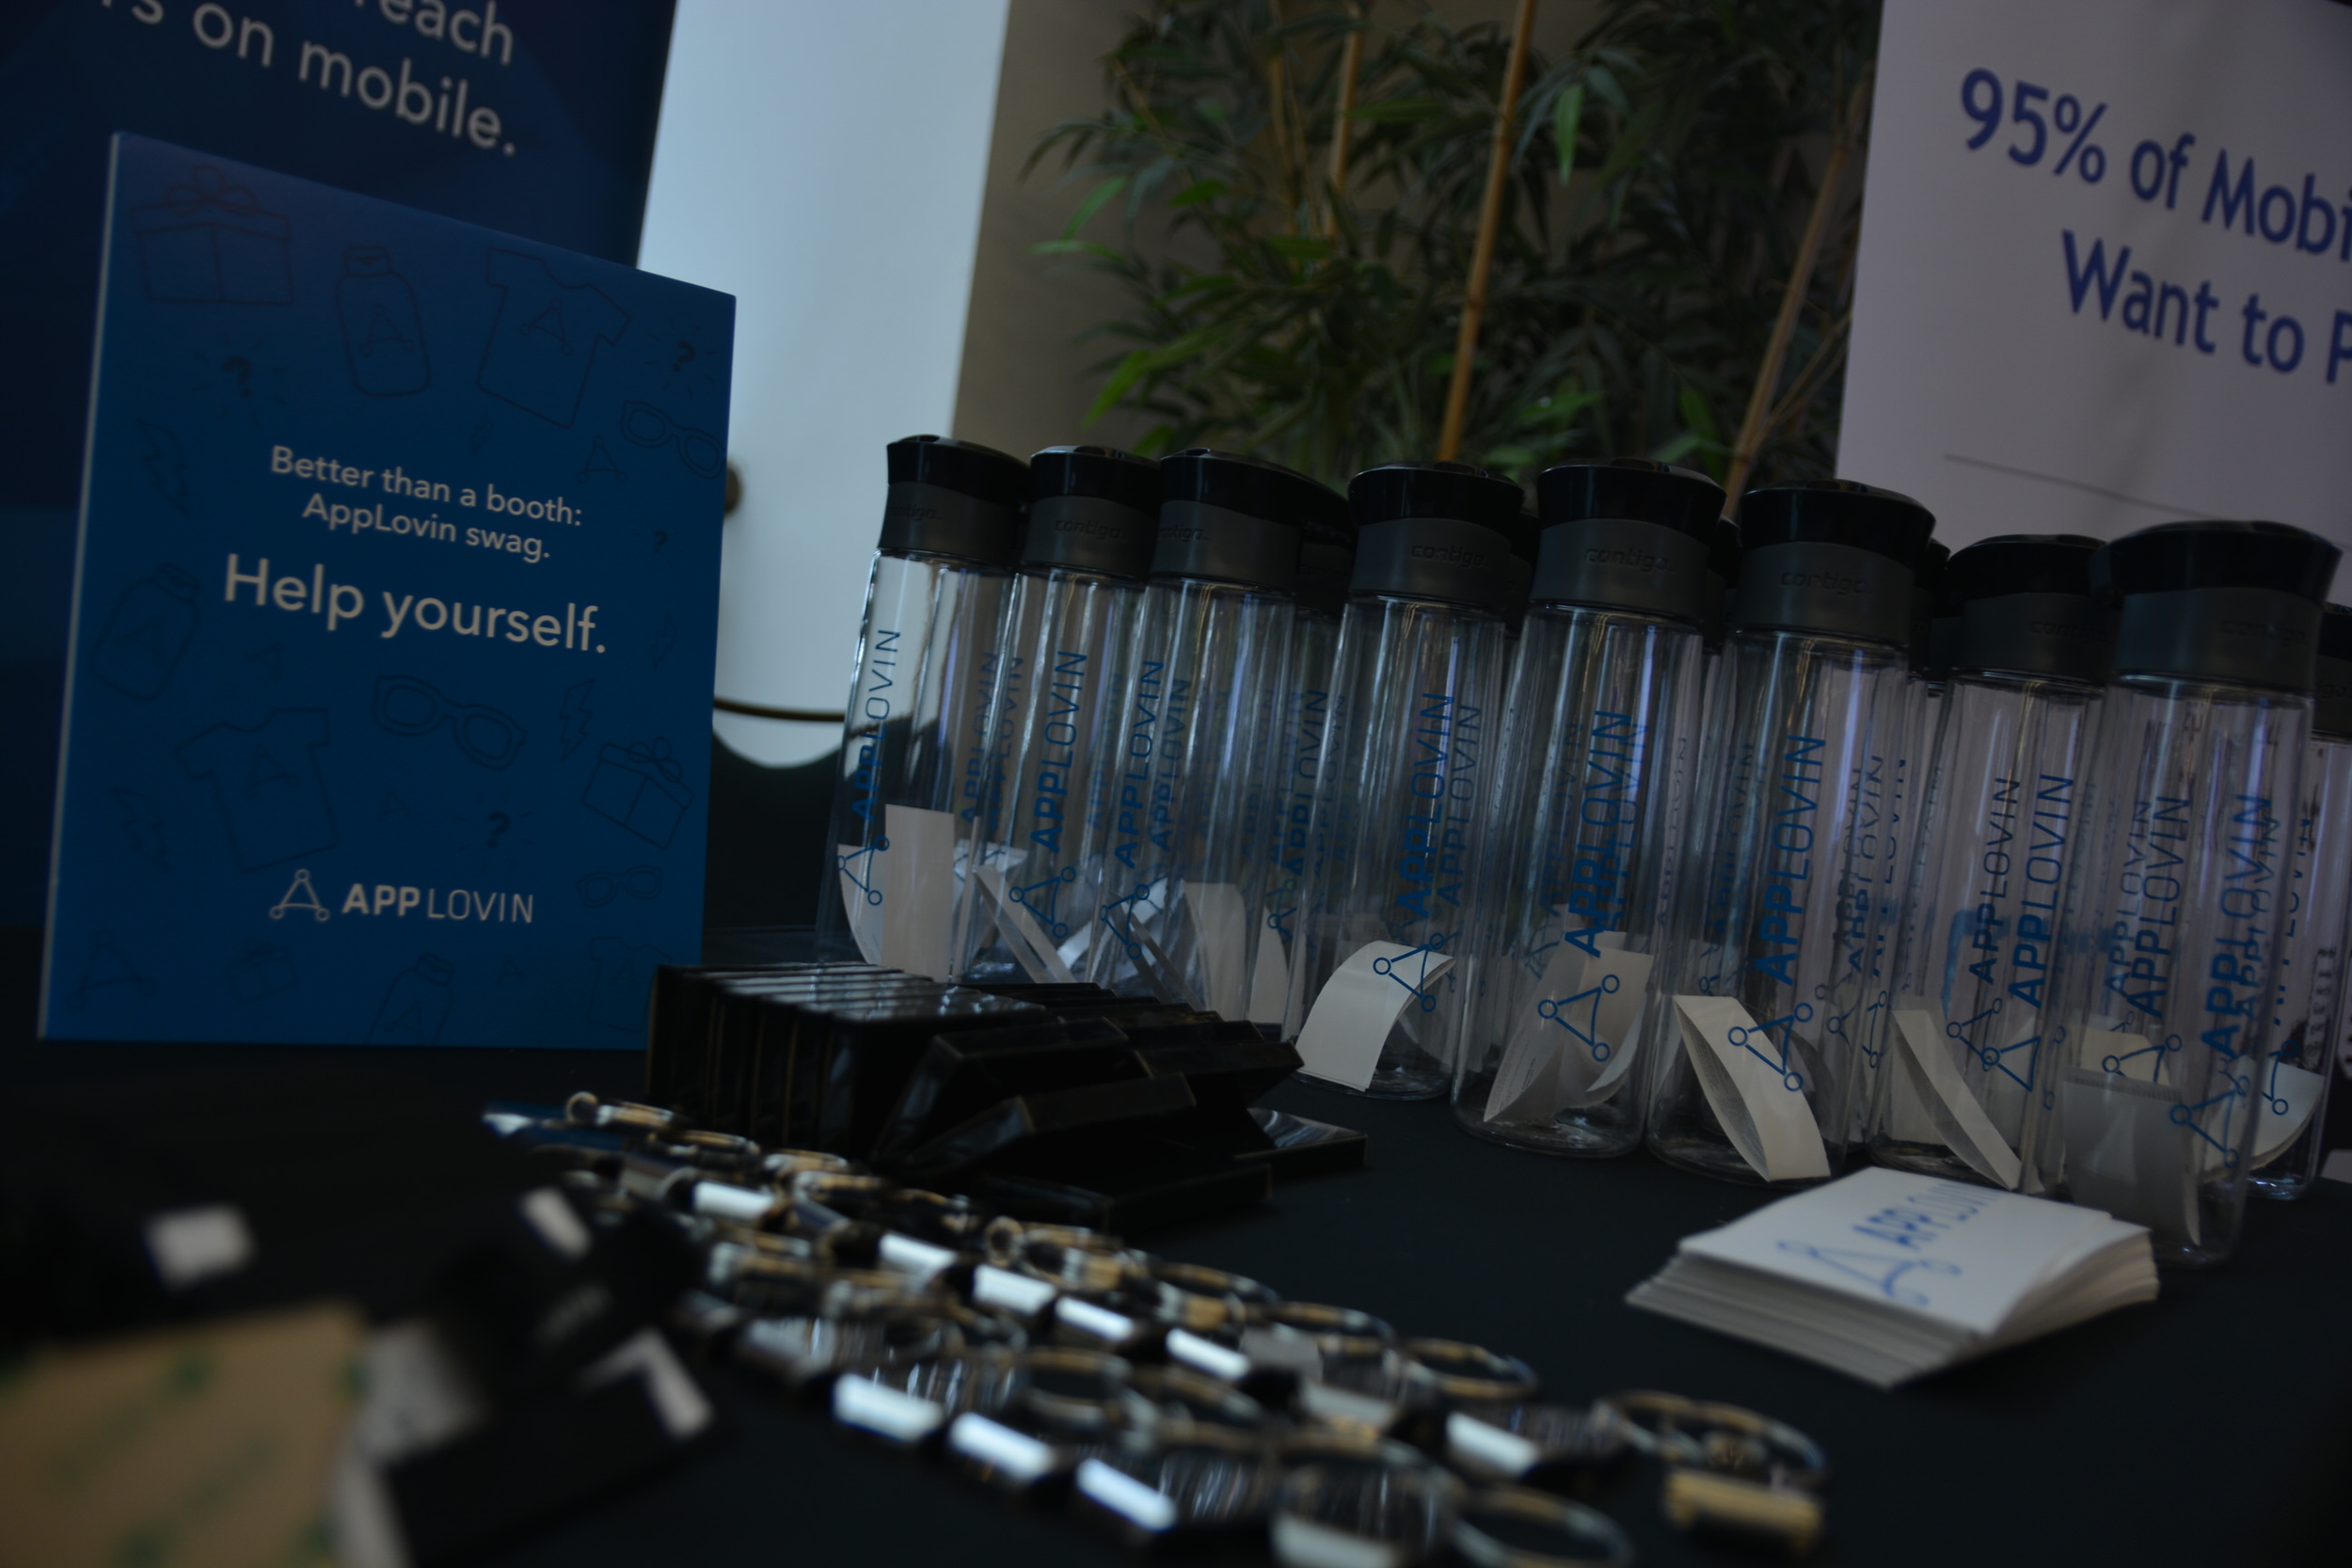 More free swag for attendees, courtesy of AppLovin